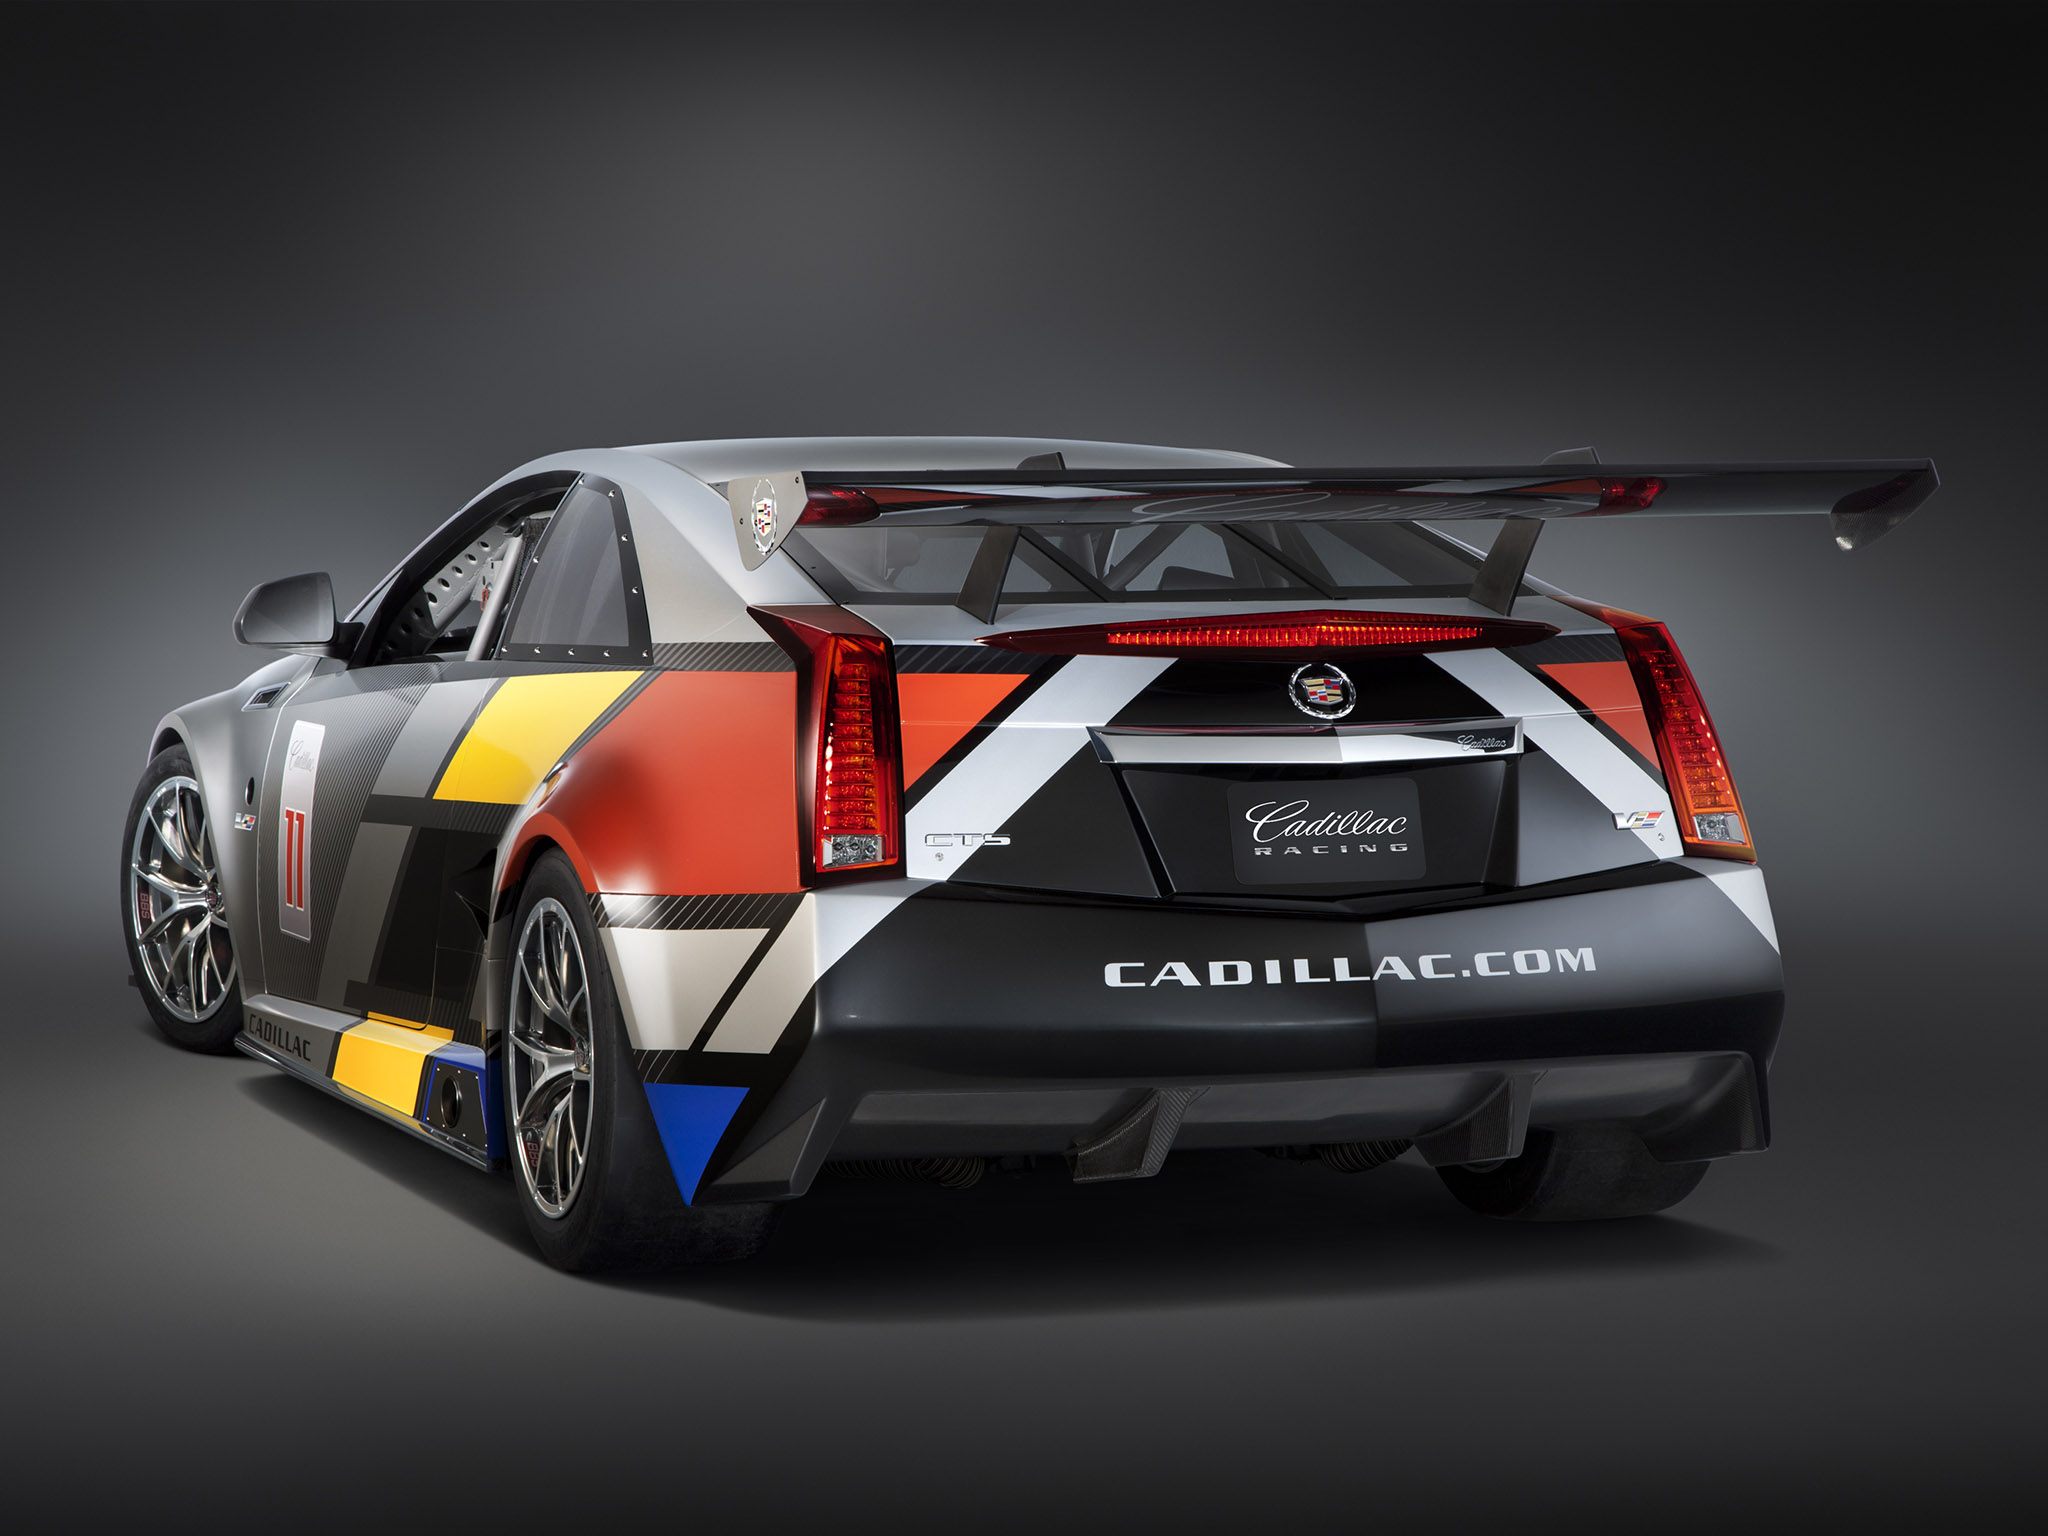 2011, Cadillac, Cts v, Racing, Coupe, Race, Muscle, Gd Wallpaper